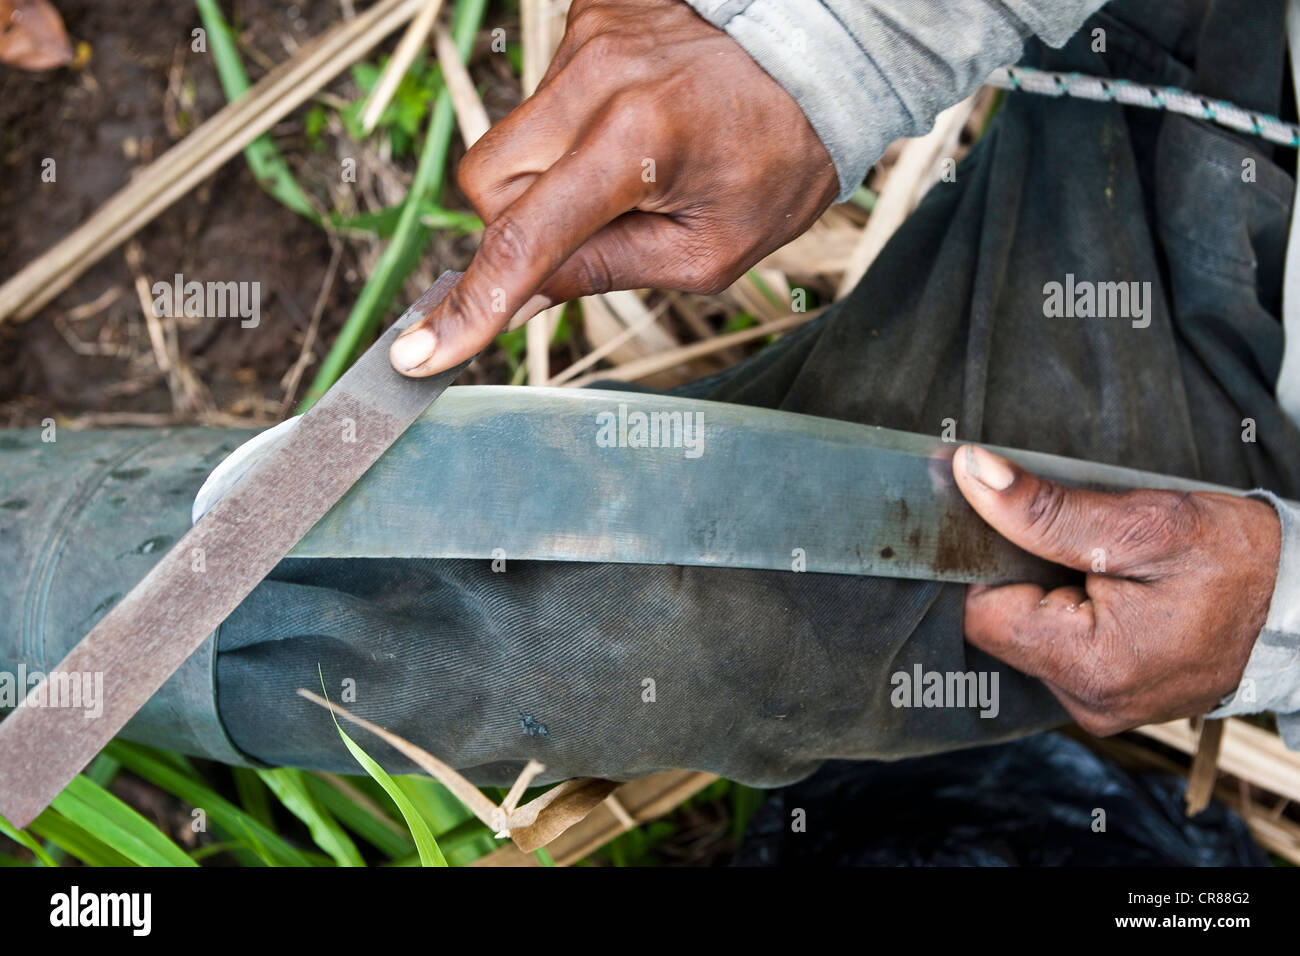 France, Martinique (French West Indies), Trois Rivieres, Trois Rivieres distillery, sugar cane cutter, compulsory mention Stock Photo